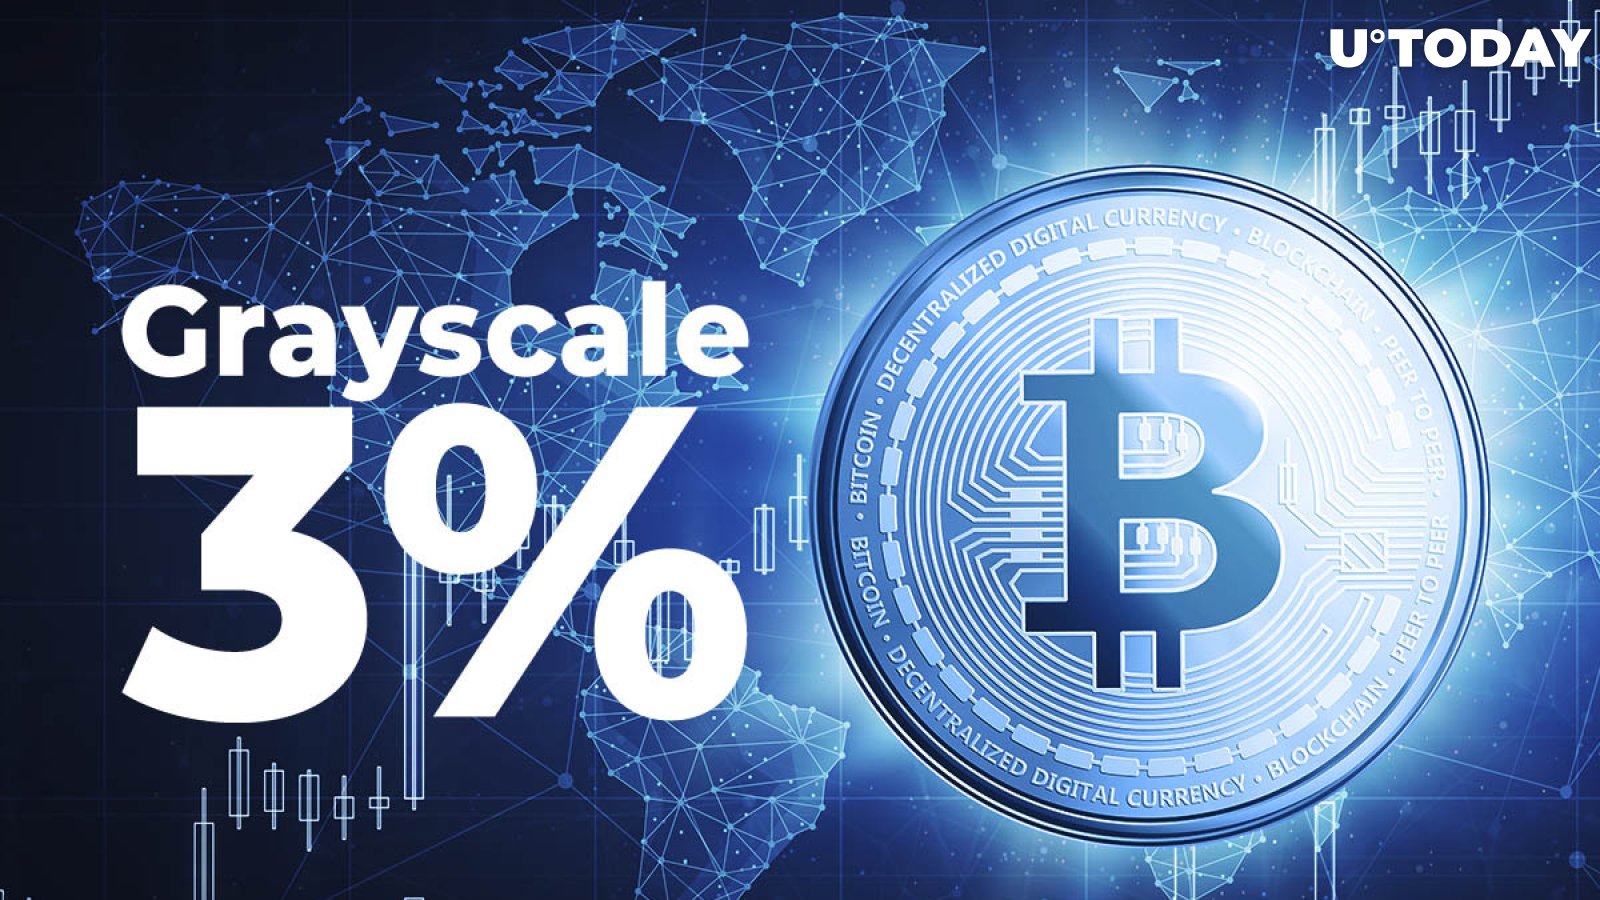 Grayscale Now Owns 3% of All Bitcoin in Circulation, Adding 60,000 BTC Over Past Month